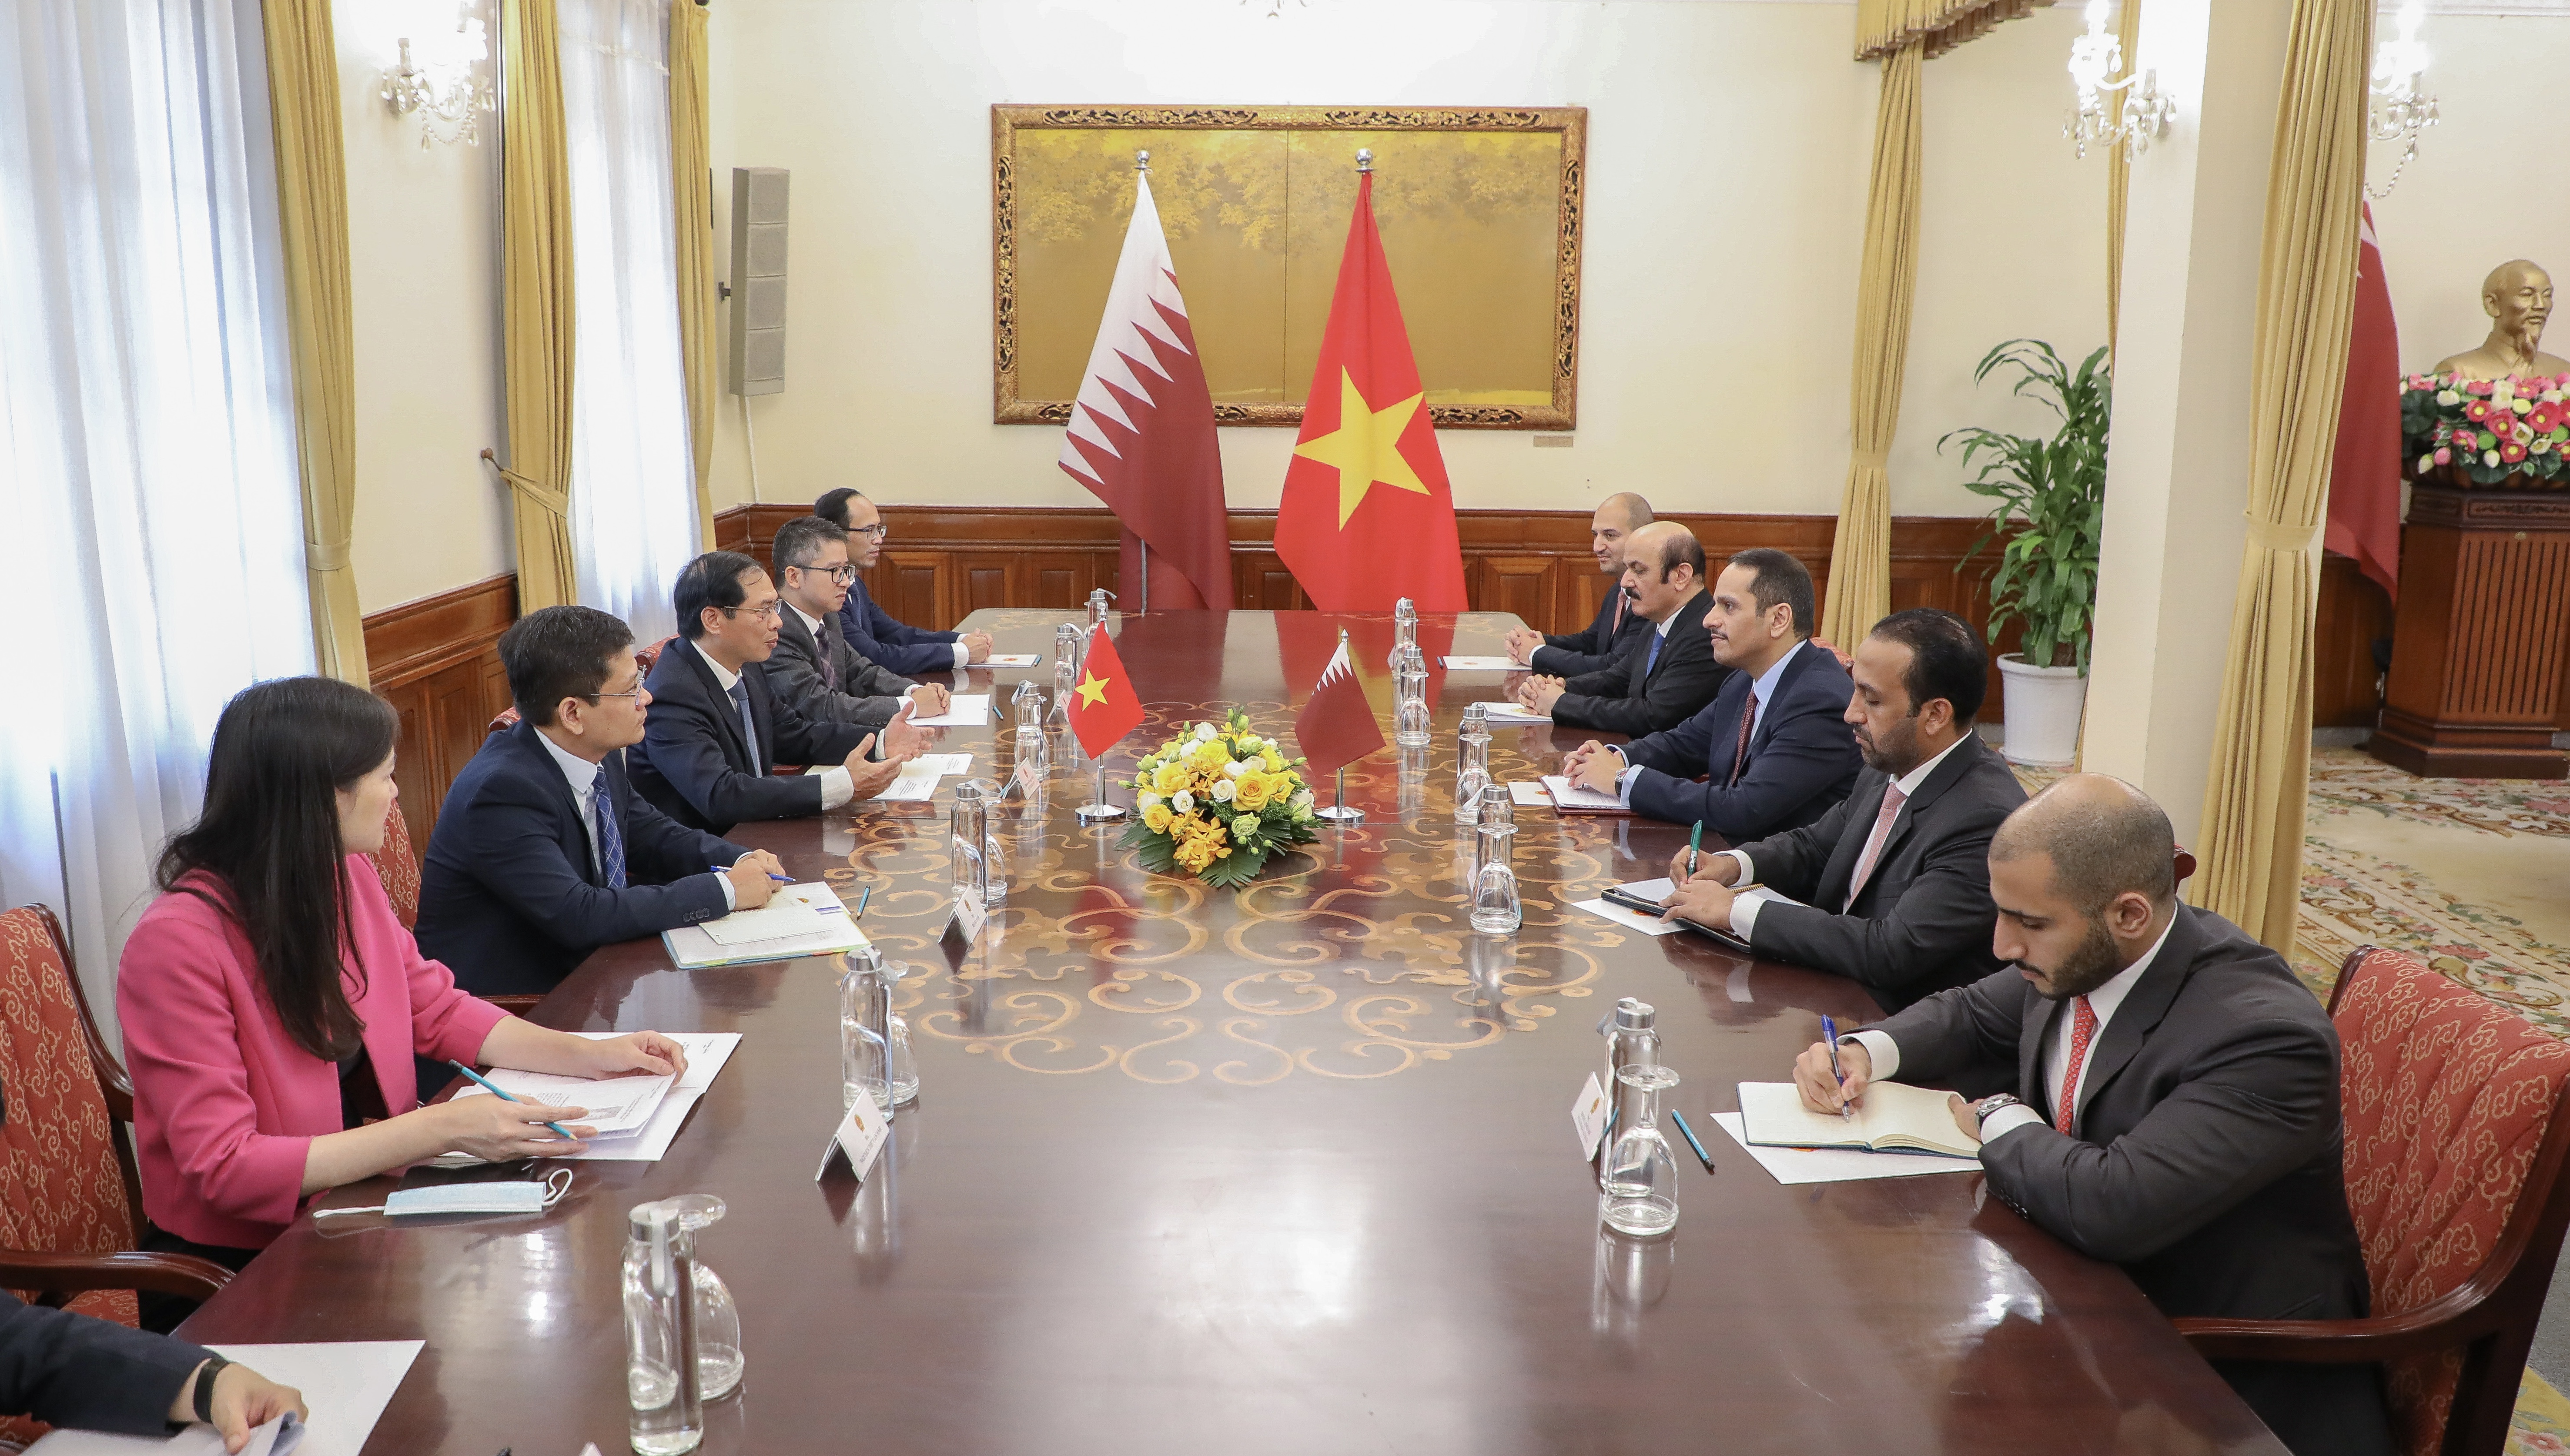 Deputy Prime Minister and Minister of Foreign Affairs Meets Foreign Minister of Vietnam